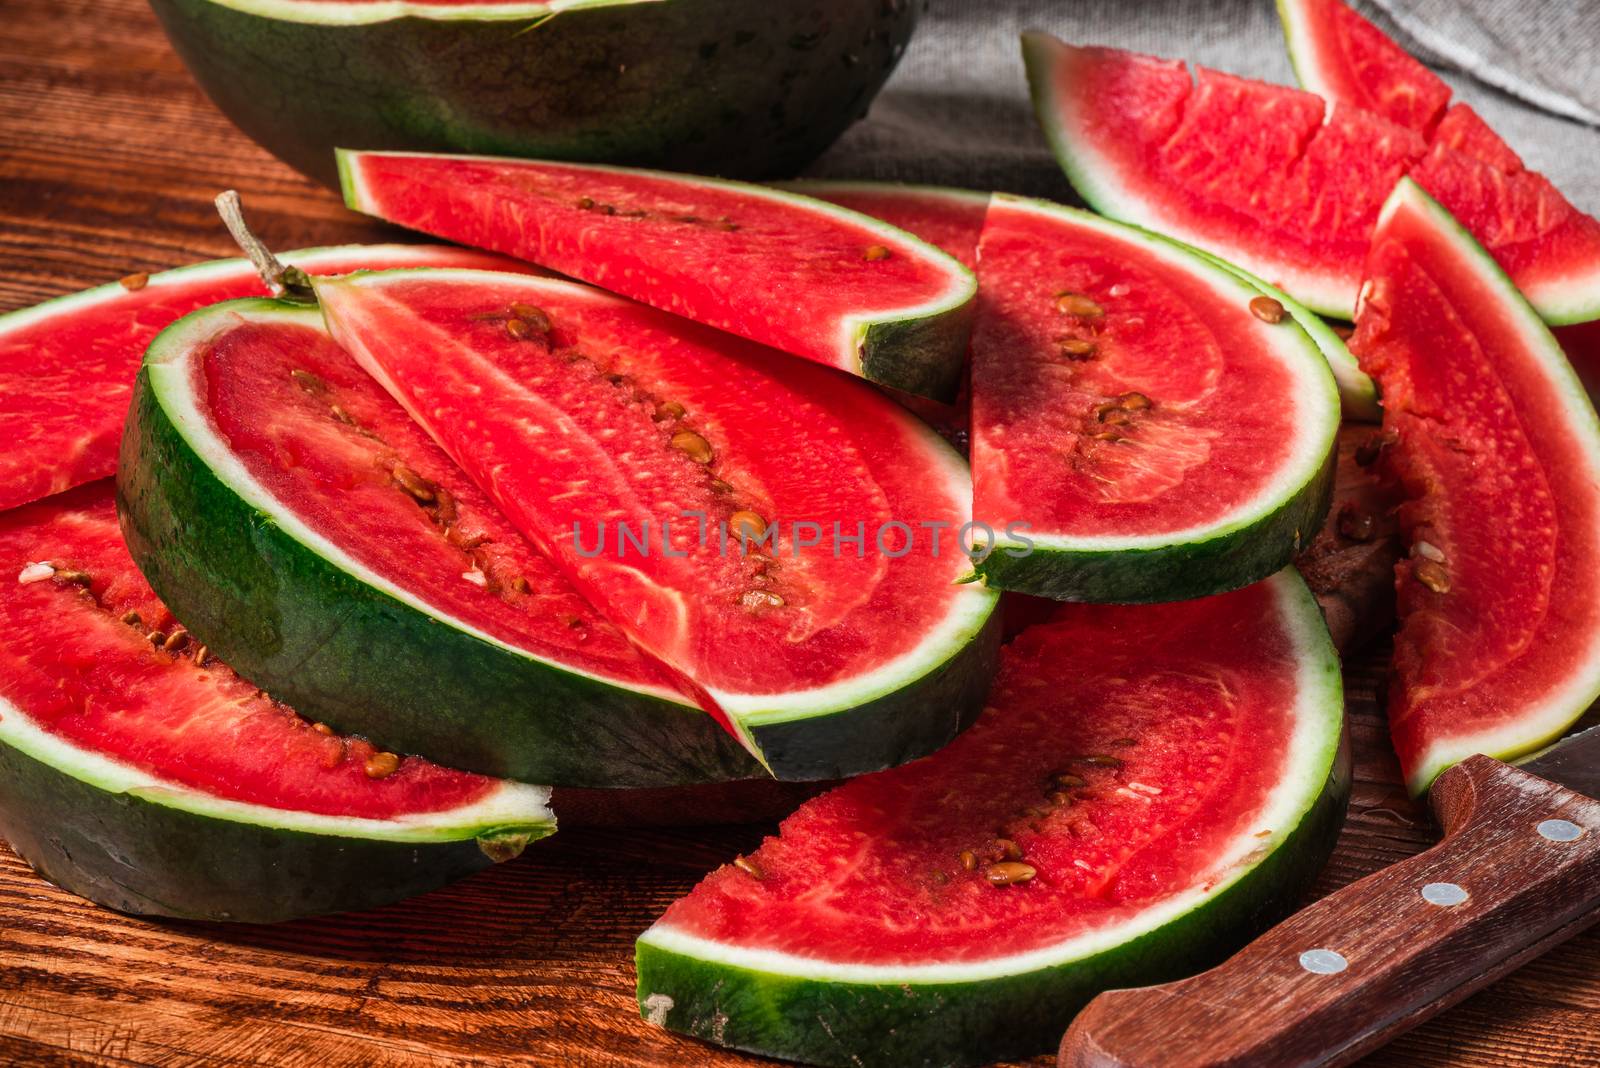 Watermelon slices lying on wooden table by Seva_blsv